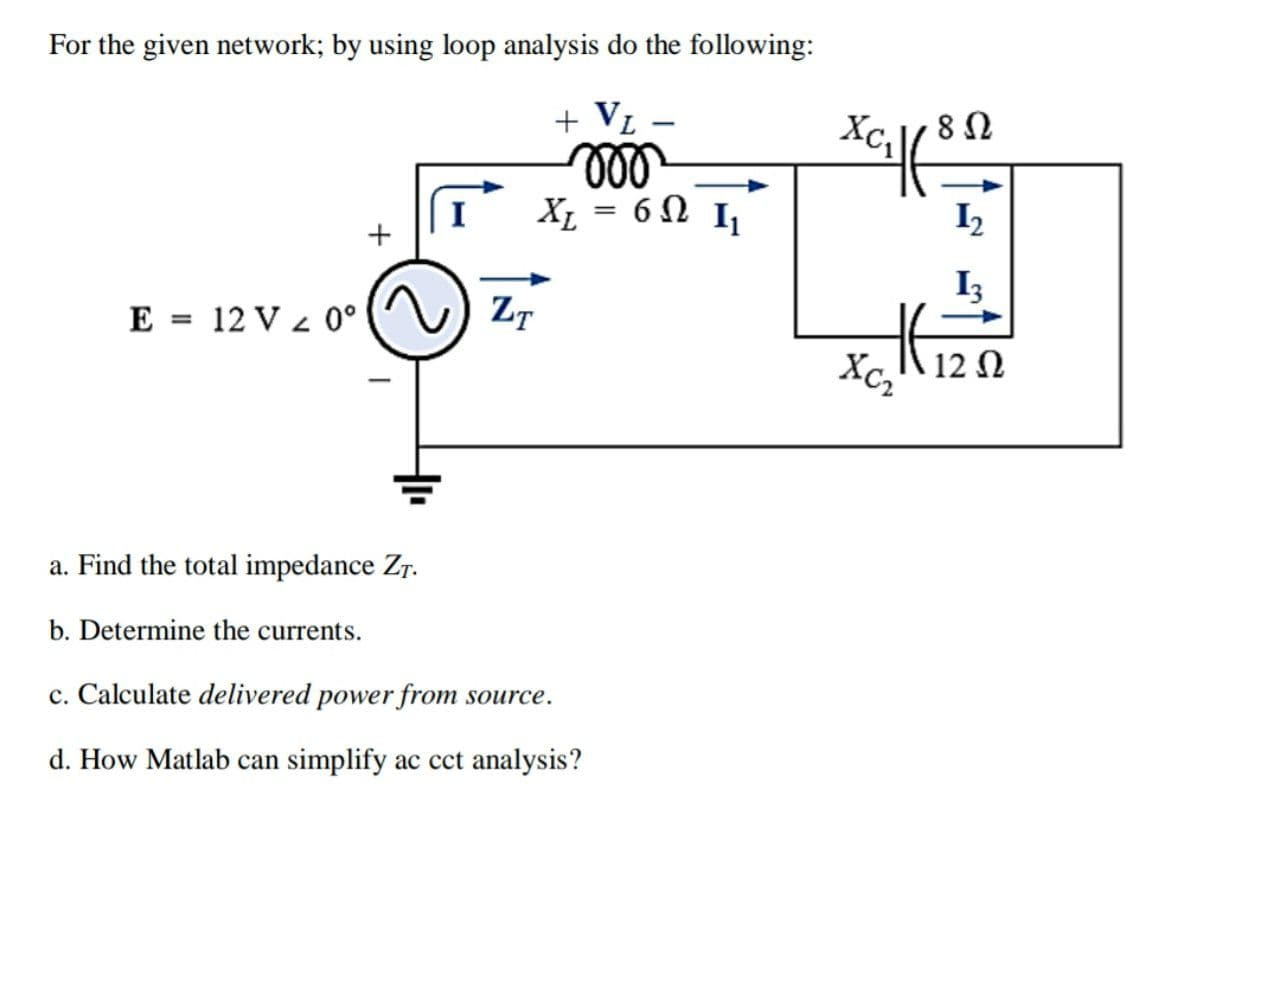 For the given network; by using loop analysis do the following:
+ V1
ll
6Ω 1
XL
I2
I3
E = 12 V z 0°
) ZT
Xc,
12 N
a. Find the total impedance Zr.
b. Determine the currents.
c. Calculate delivered power from source.
